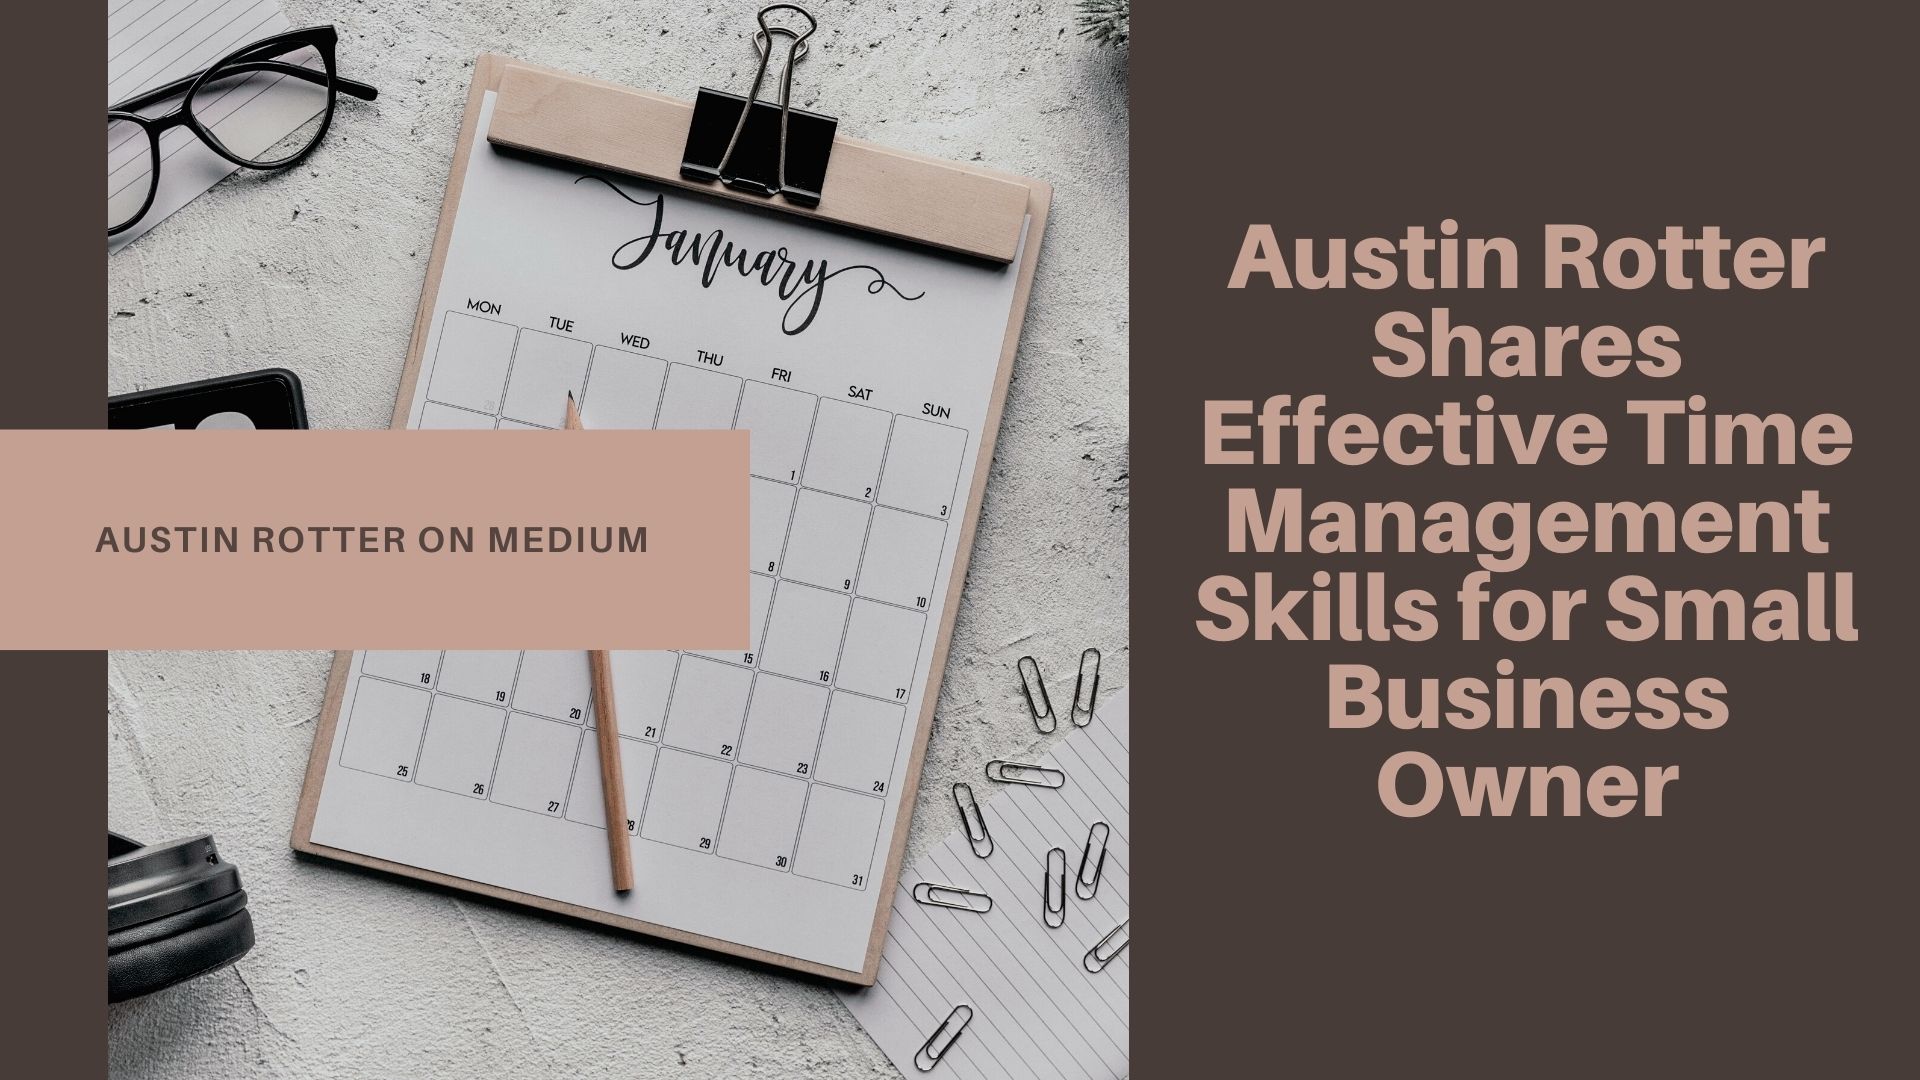 Austin Rotter
Shares
Effective Time
Management

Skills for Small
Business